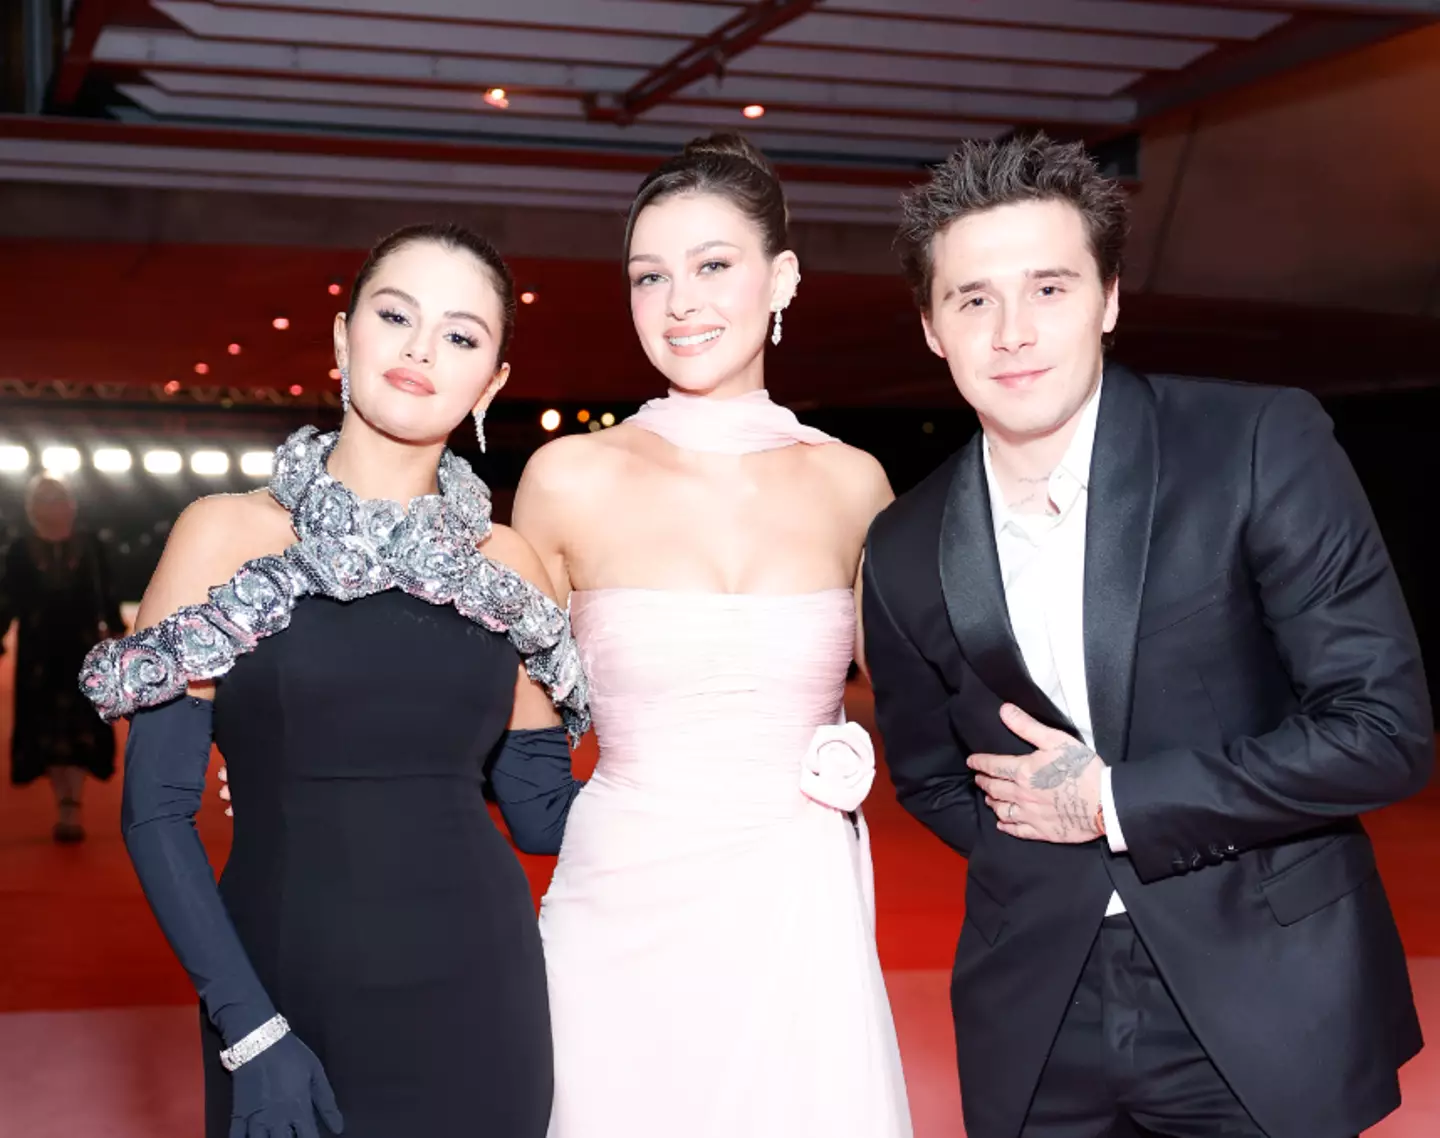 Peltz, Beckham and Gomez attended the 2023 Academy Museum Gala together.